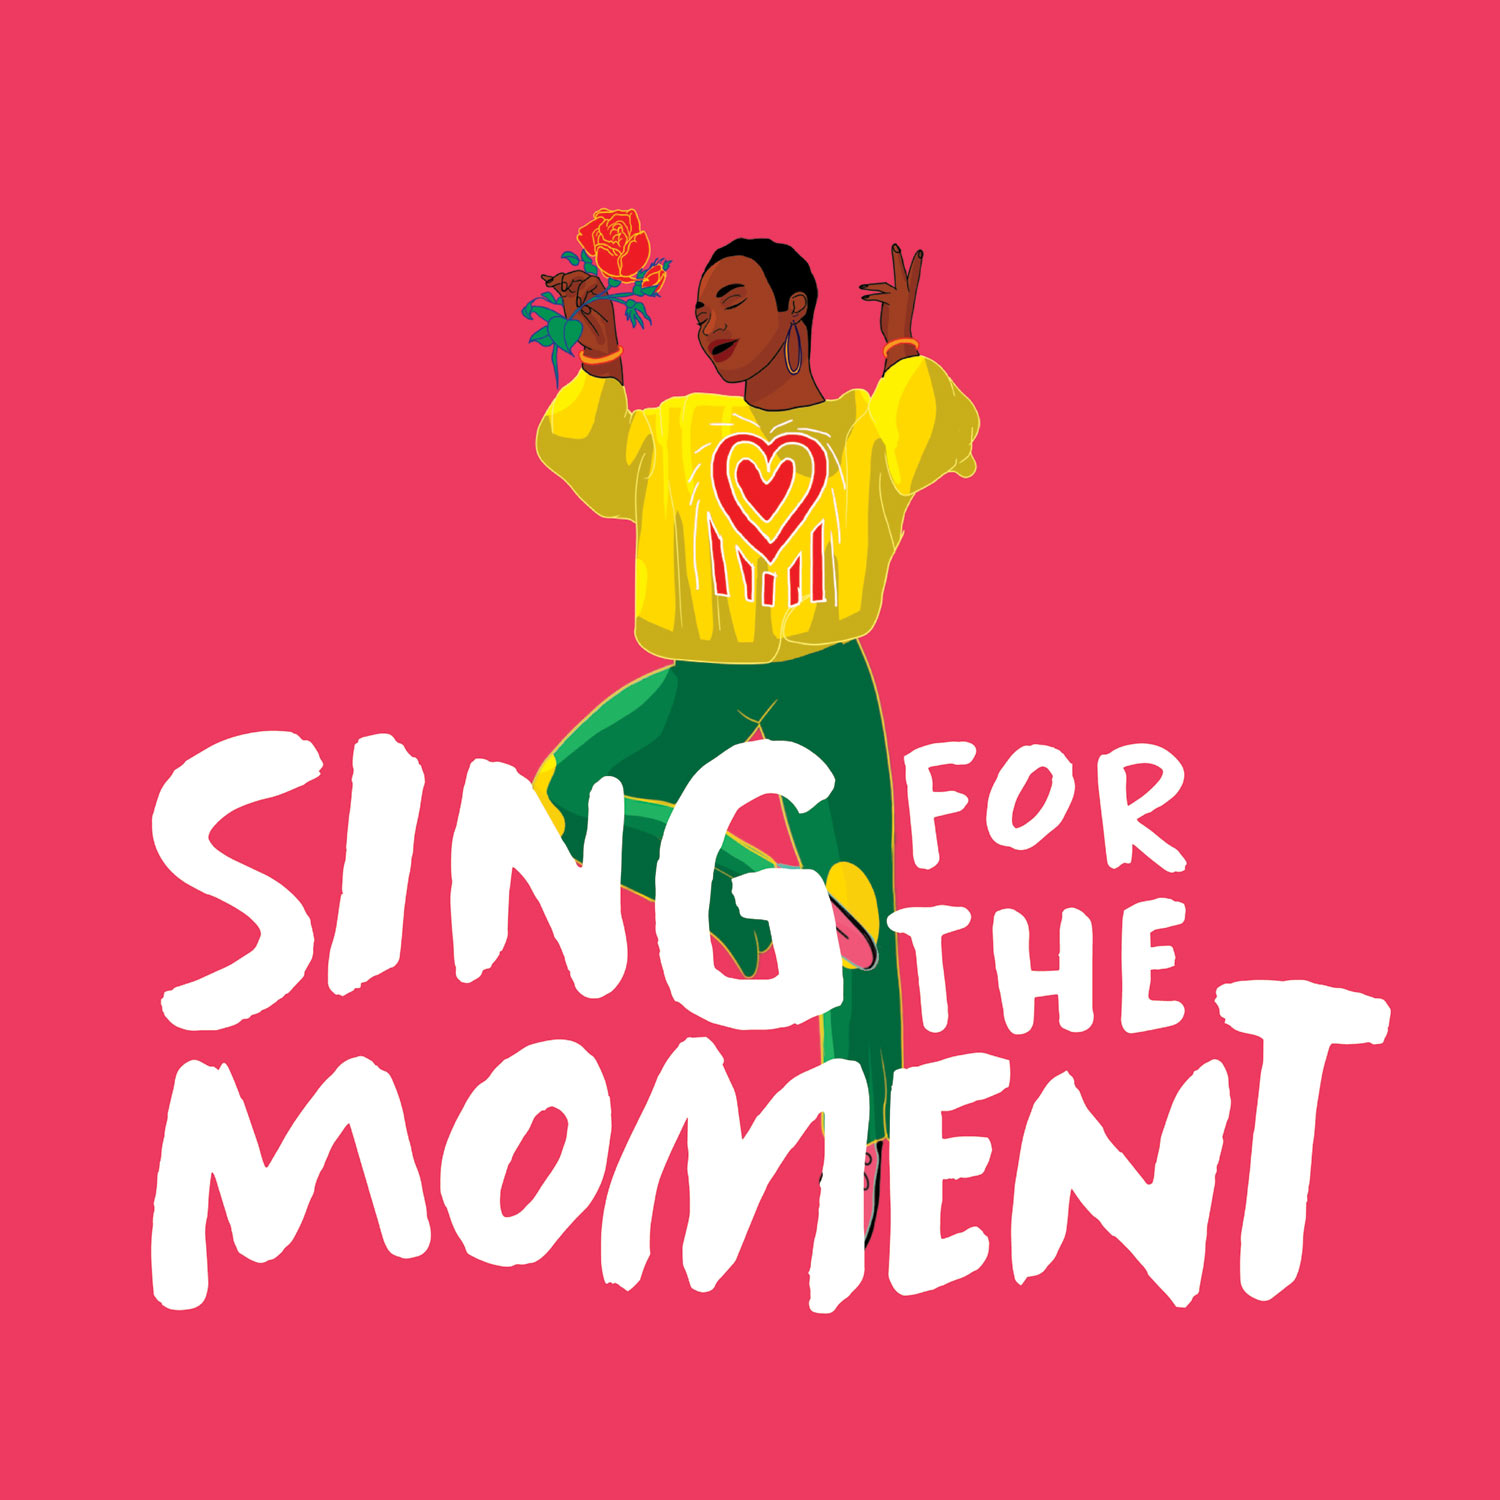 Charte graphique pour l'ASBL Sing For The Moment